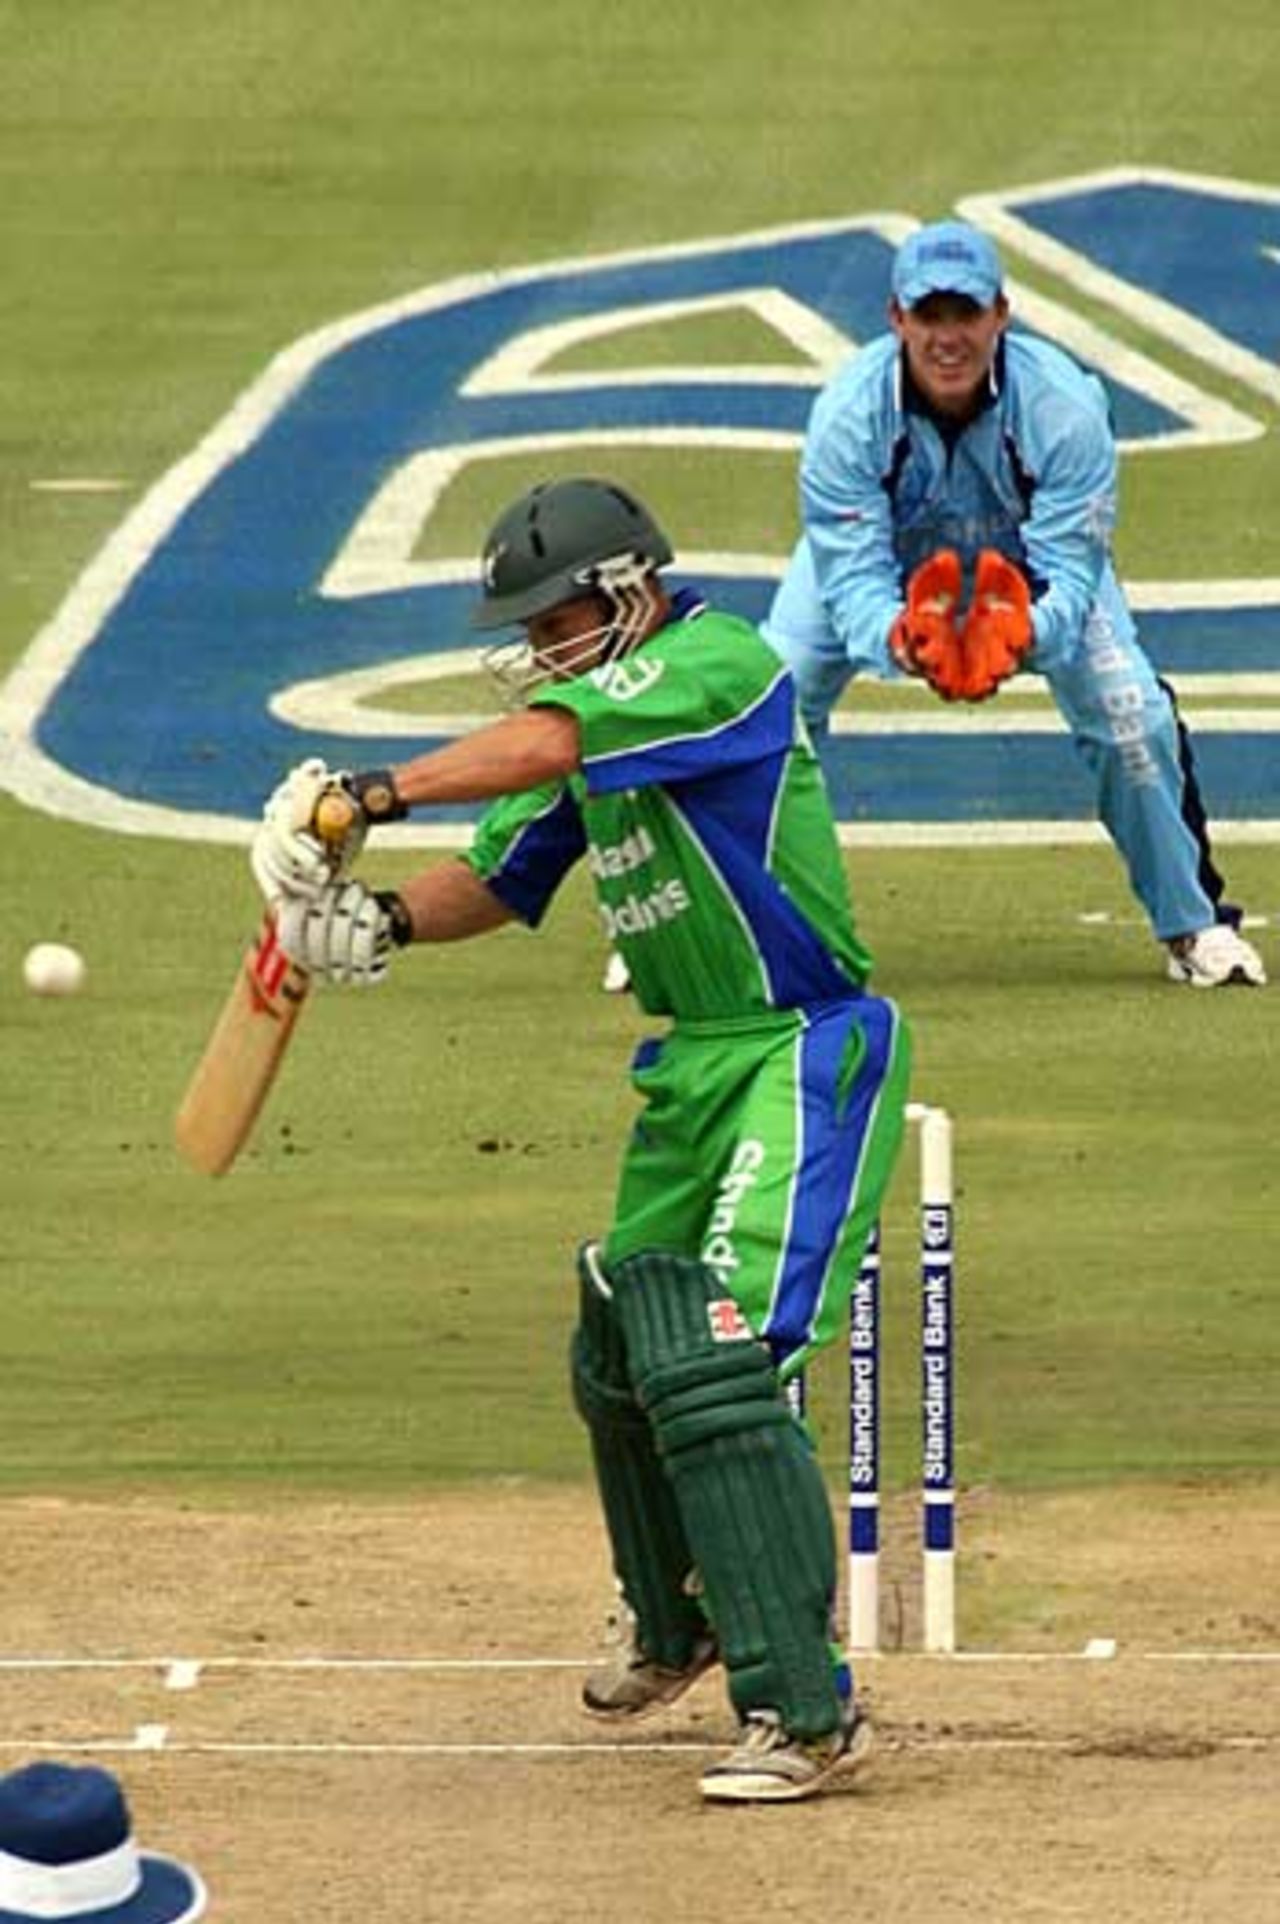 Doug Watson plays a late cut watched by AB de Villiers, Titans v Dolphins, 2nd Semi Final Standard Bank Cup, Centurion, January 8, 2005